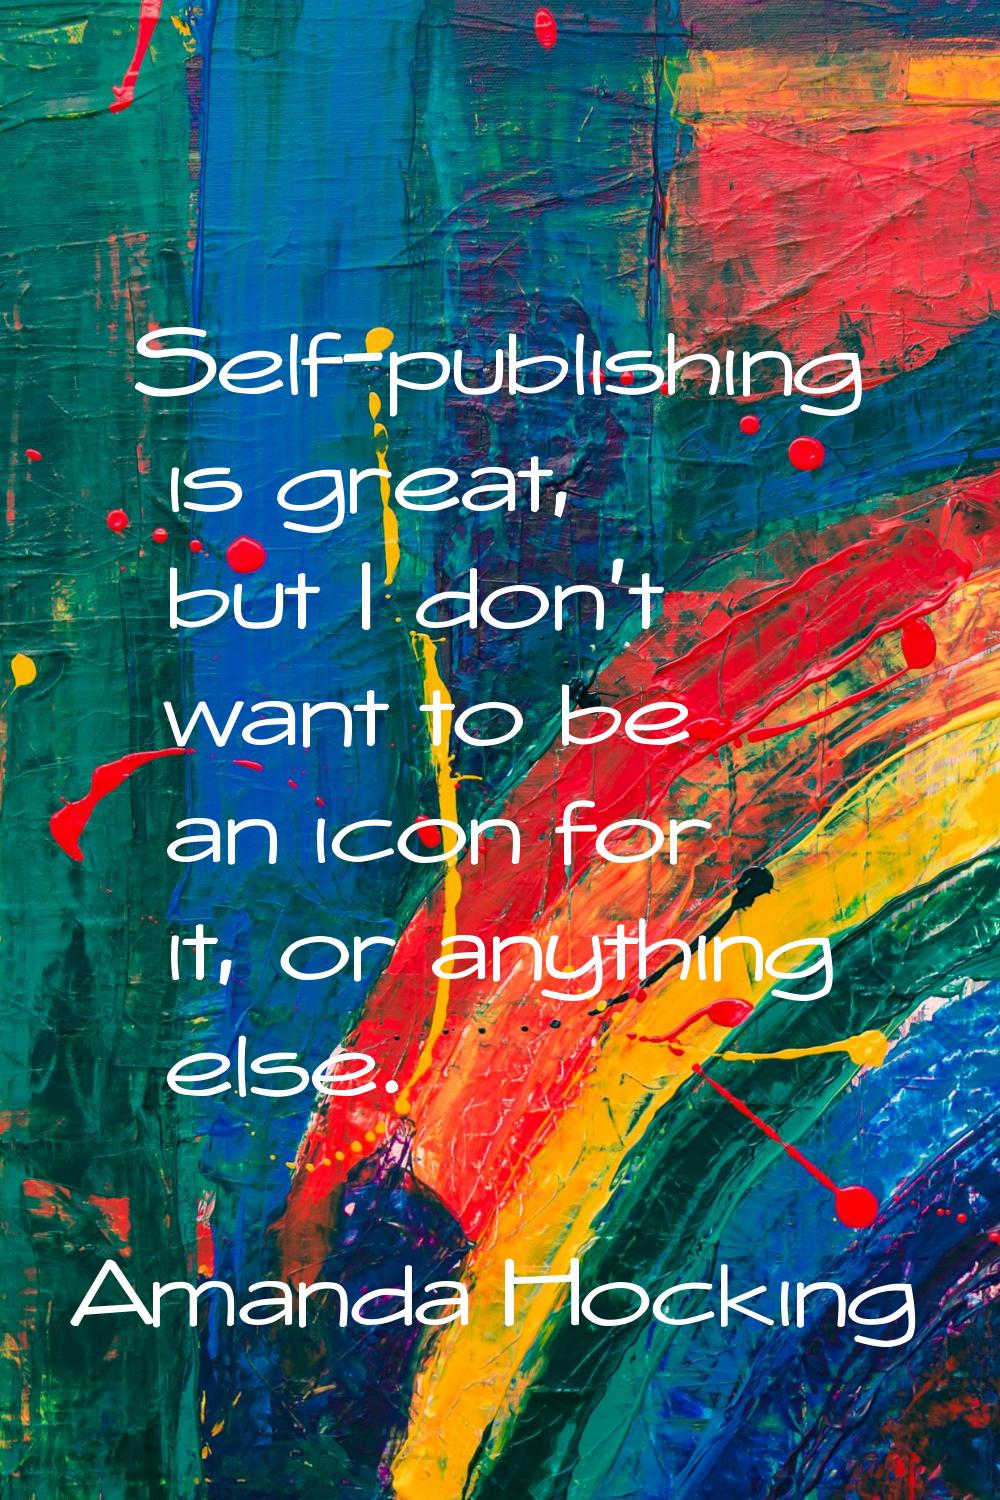 Self-publishing is great, but I don't want to be an icon for it, or anything else.